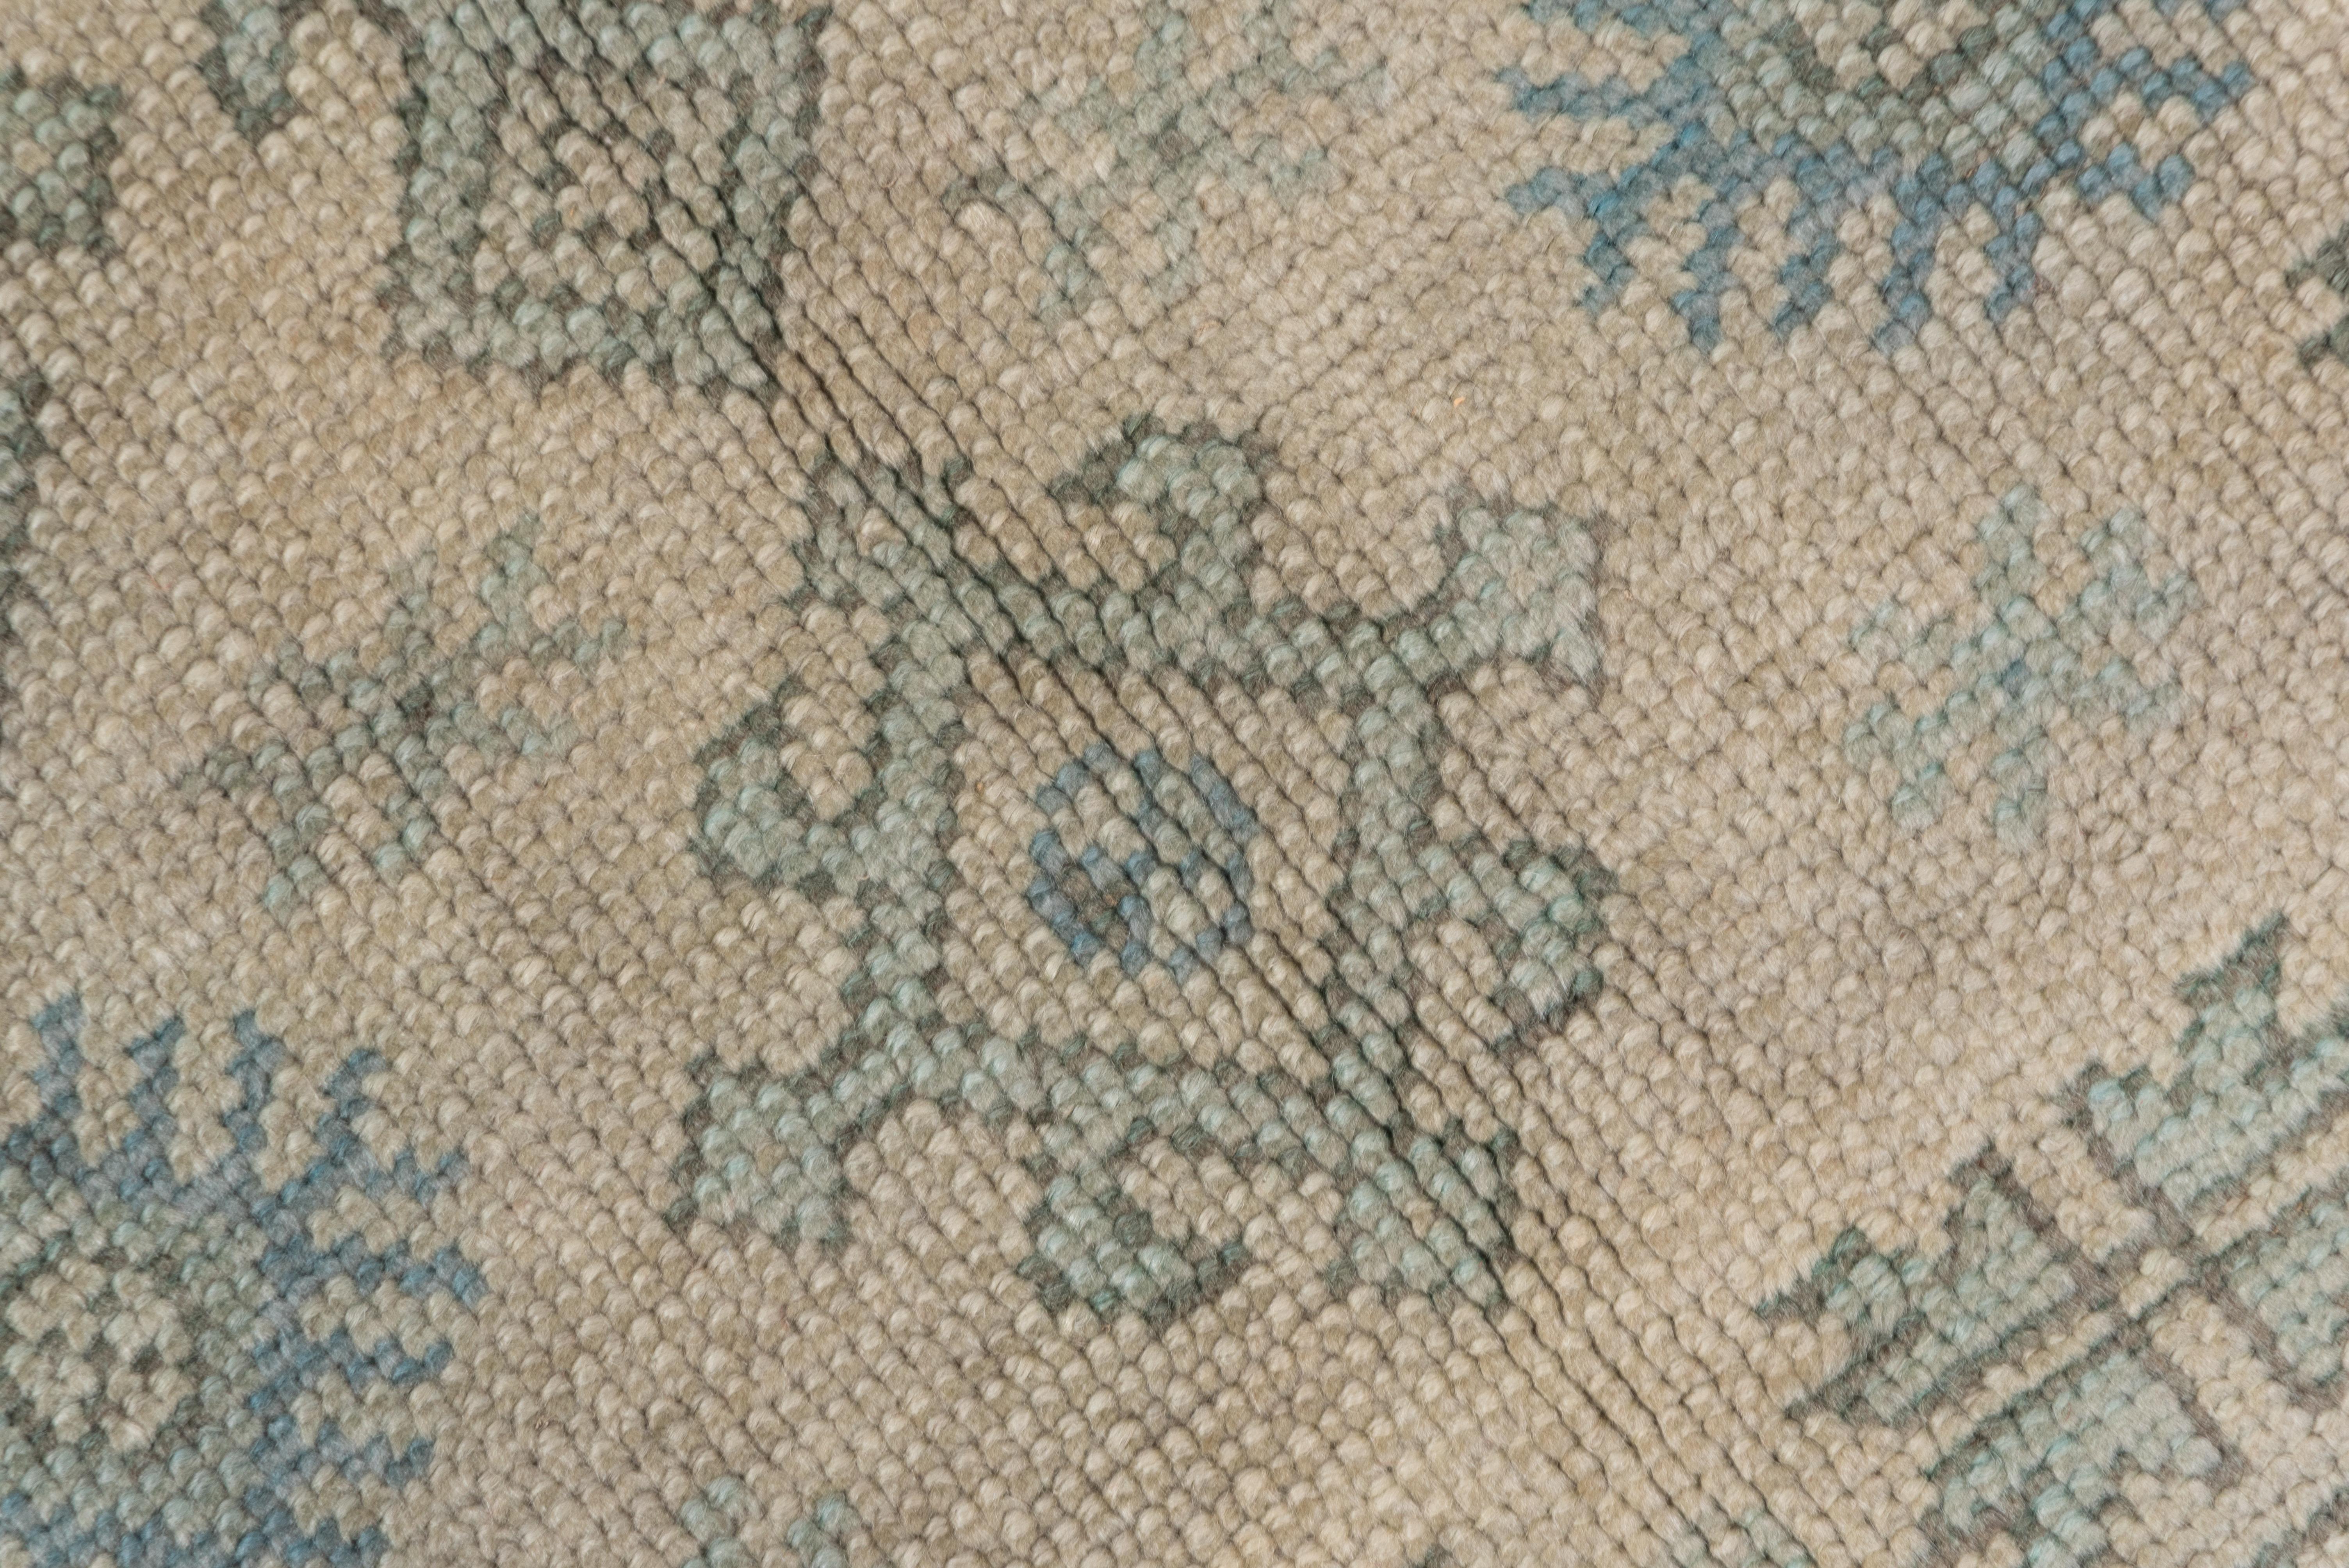 This antique west Anatolian workshop carpet shows a sand field centered by a graphite blue sharply stepped medallion with a central octogram. Geometric vines, bud quatrefoils, and arrowheaded octagons decorate the field while a light blue-grey